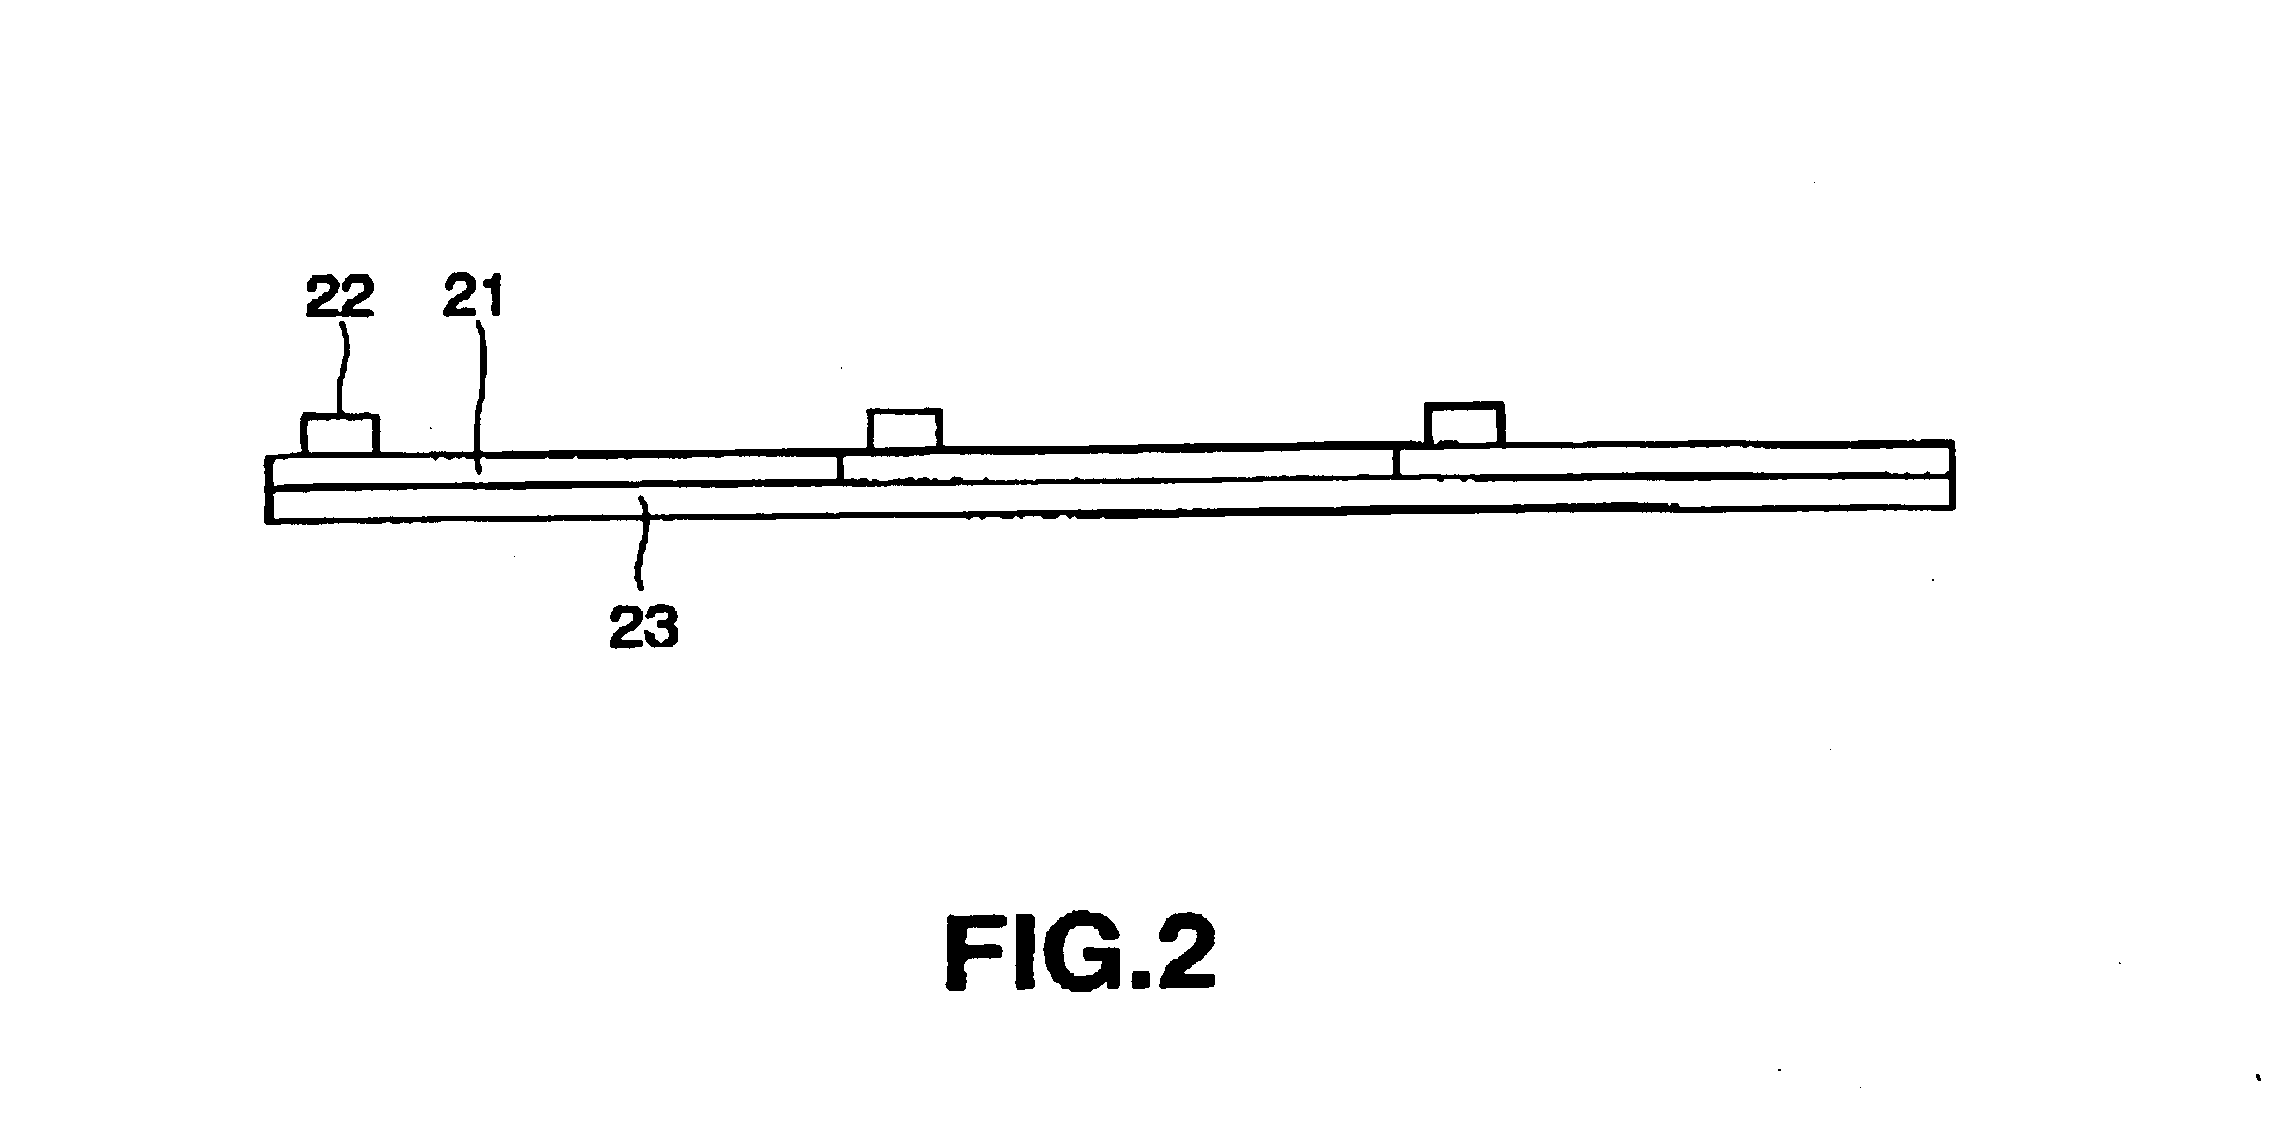 Method of manufacturing a semiconductor device having adjoining substrates